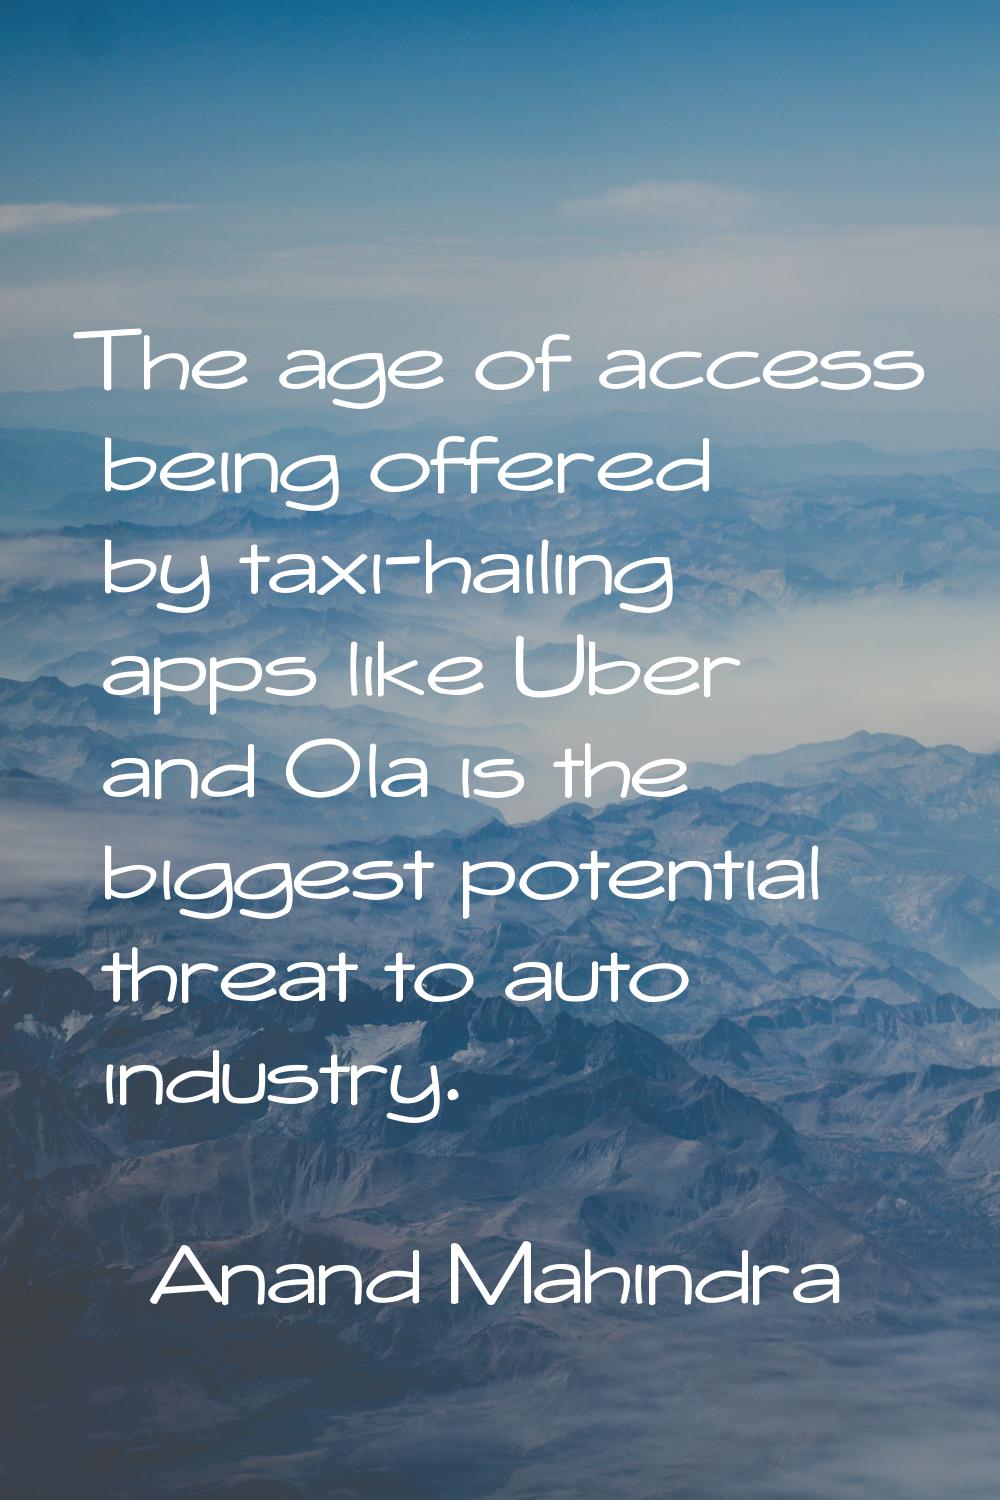 The age of access being offered by taxi-hailing apps like Uber and Ola is the biggest potential thr